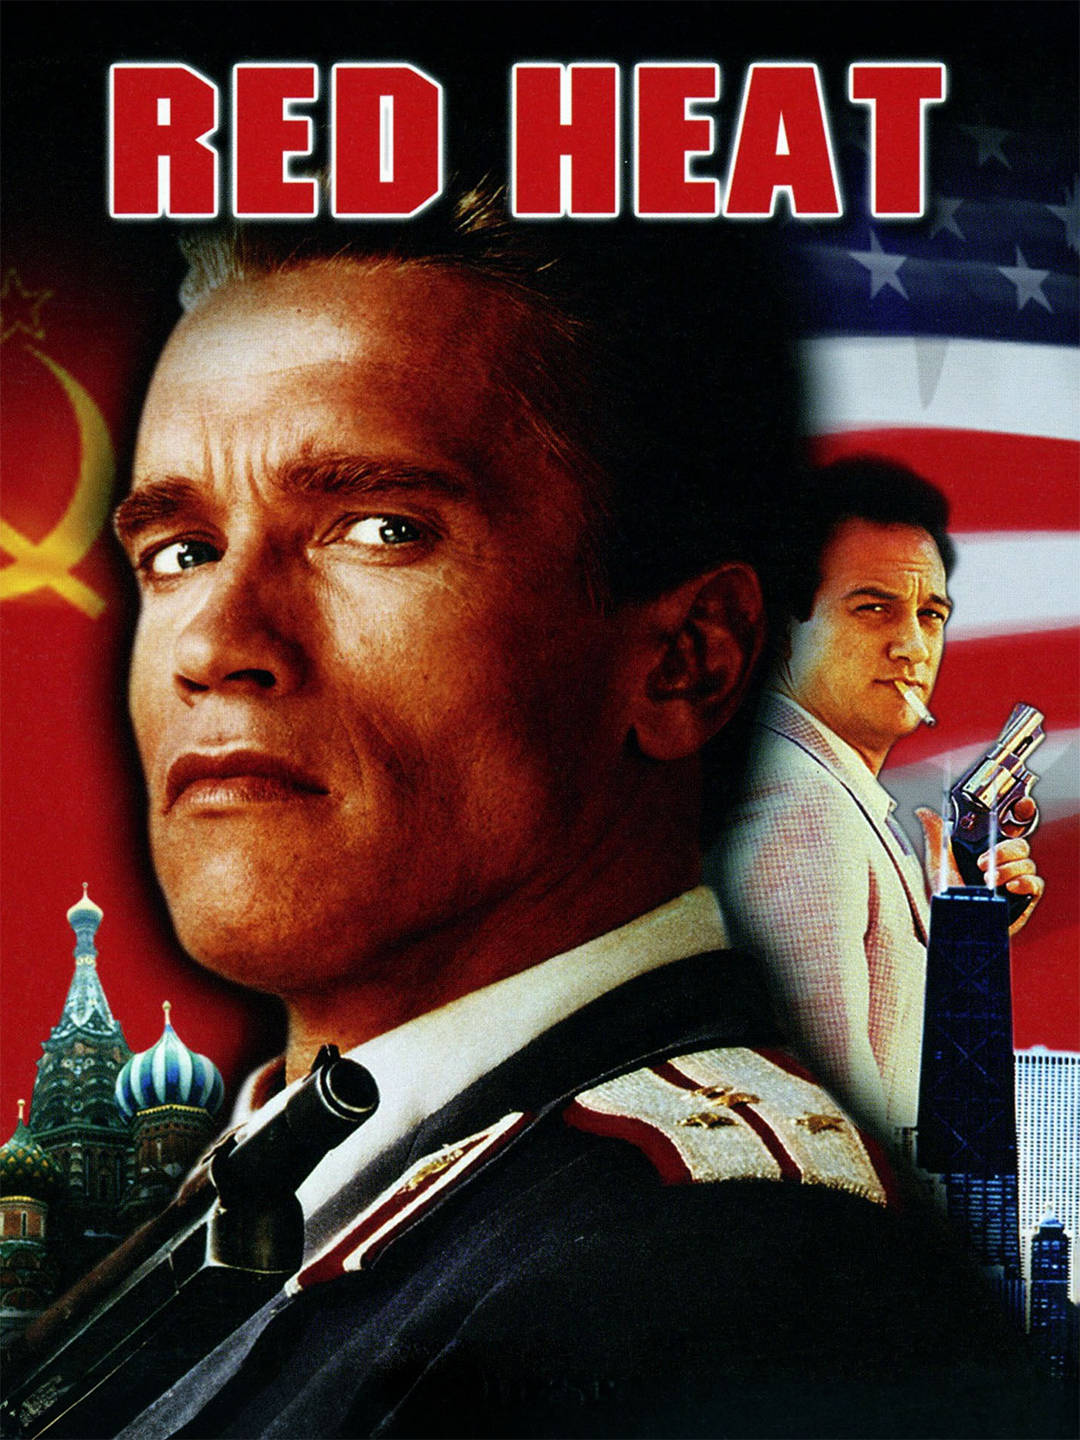 Red Heat pic